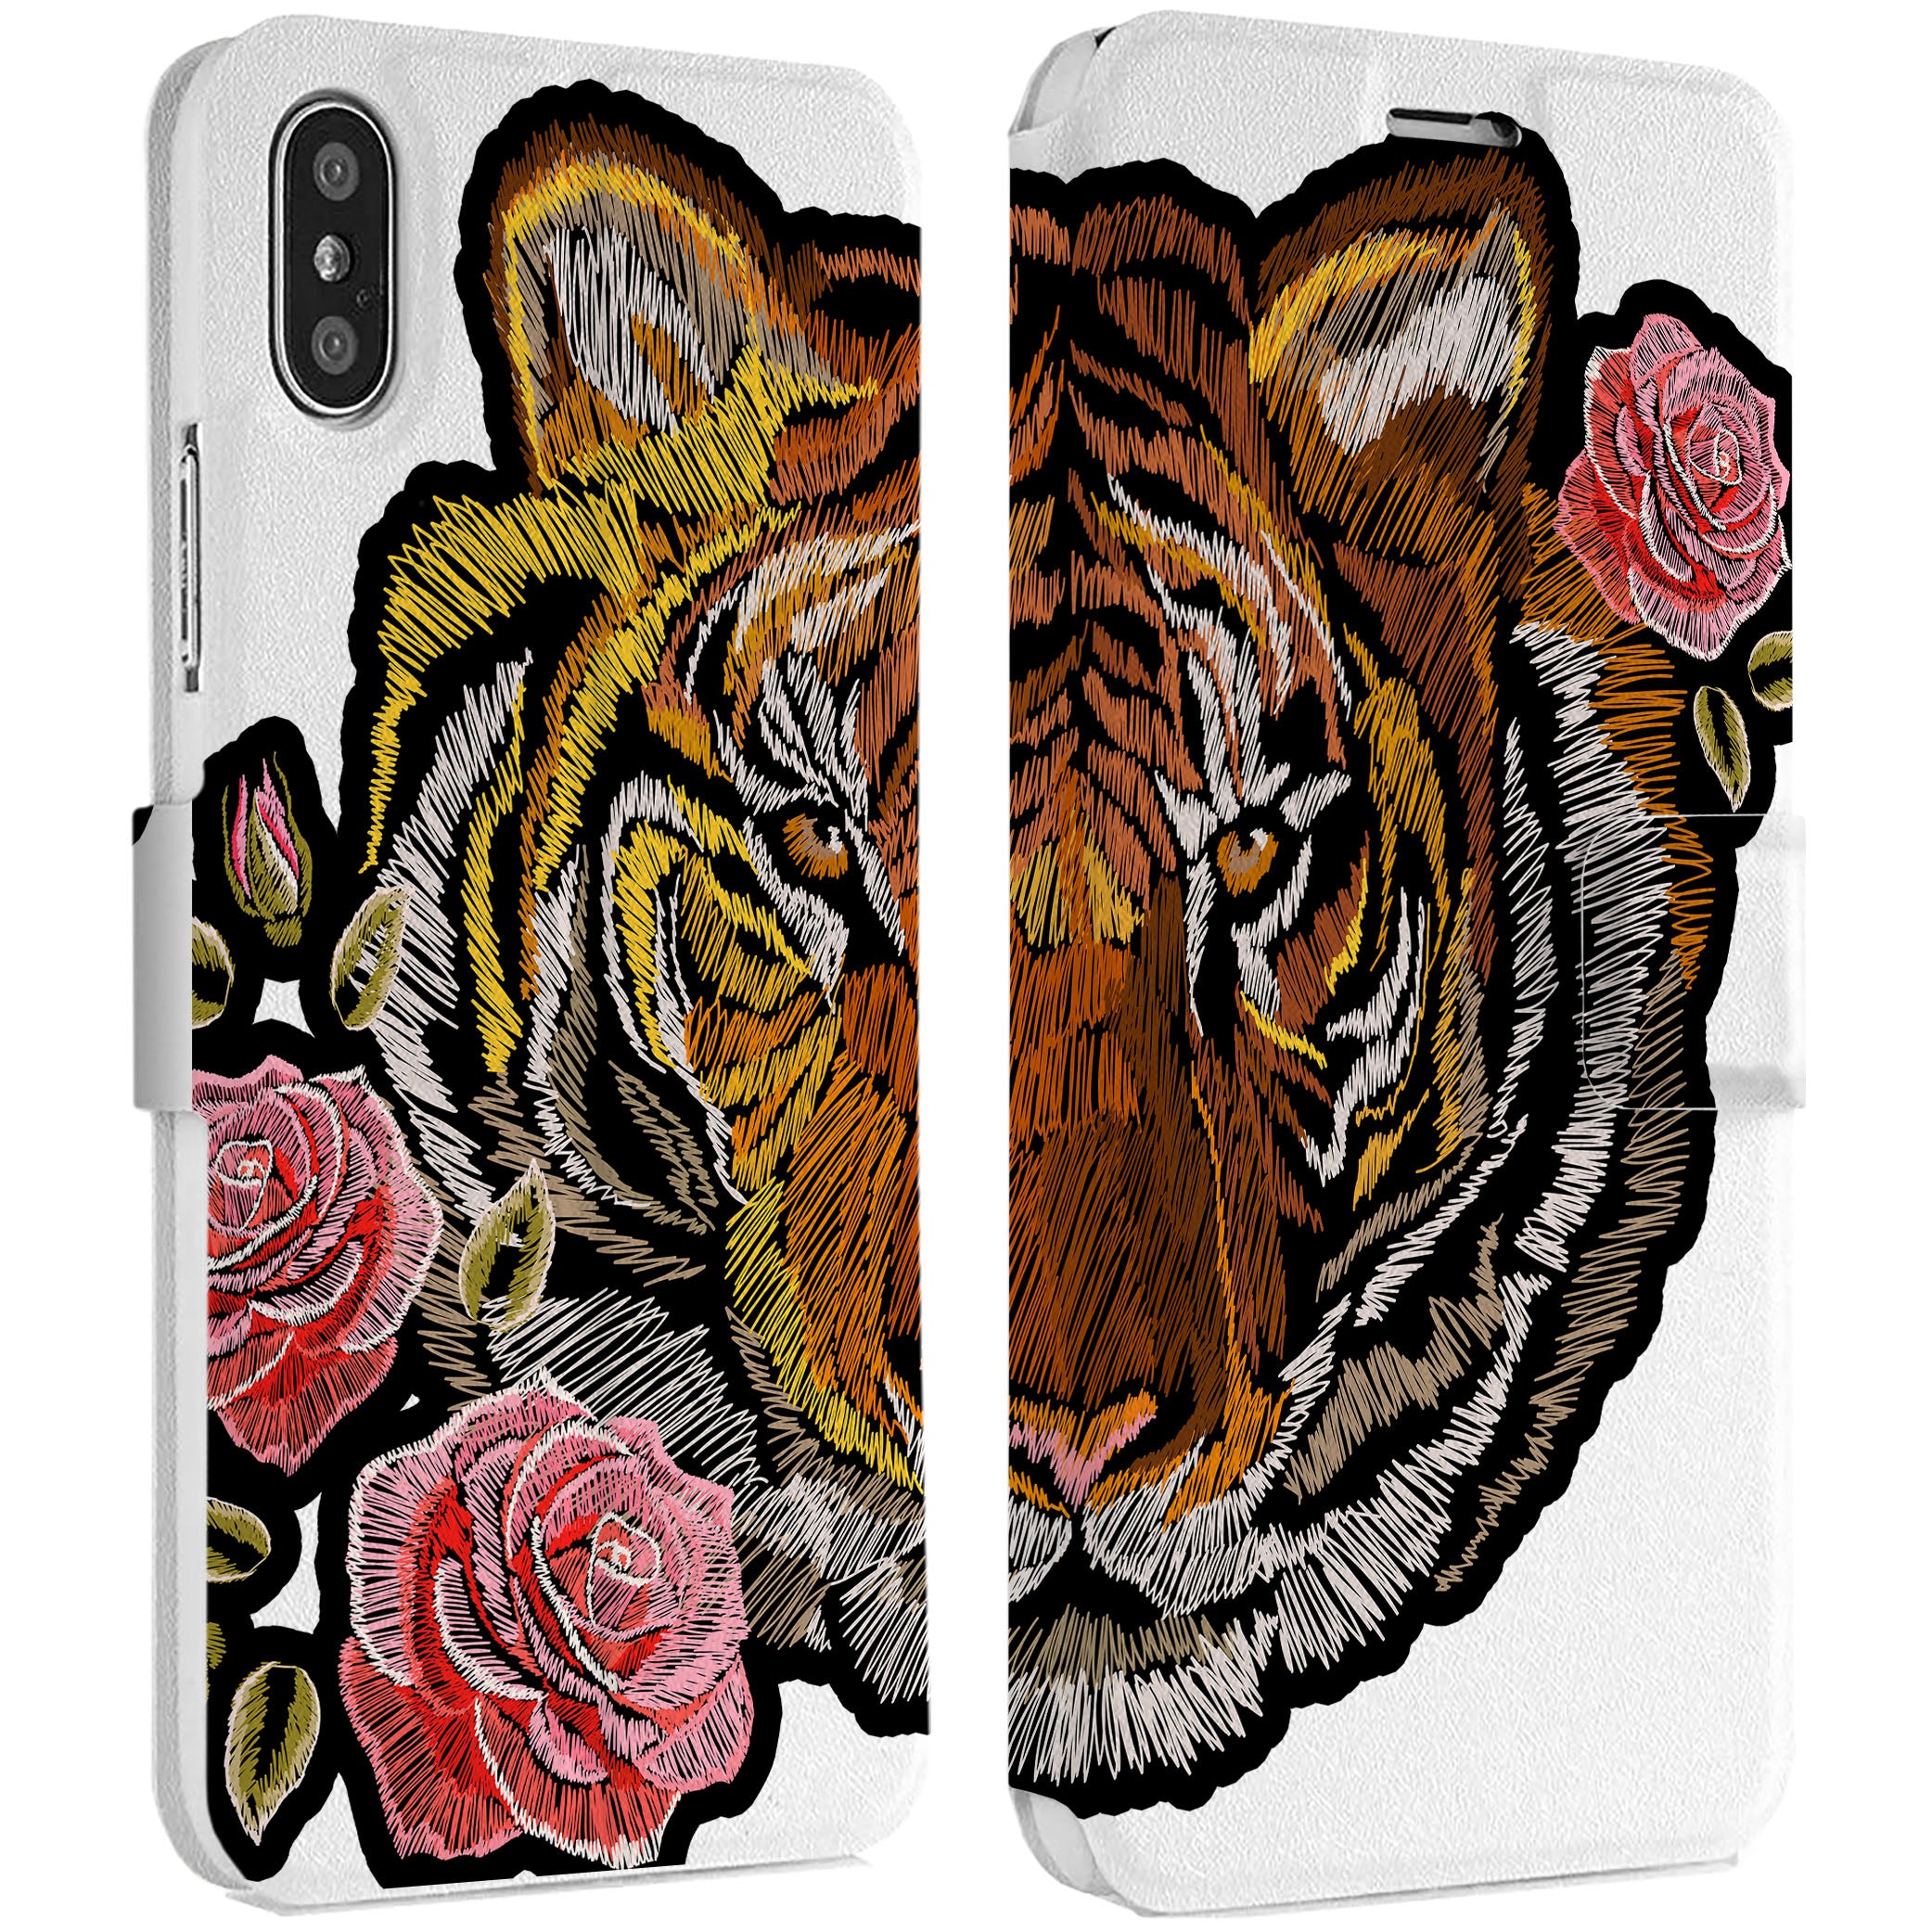 Lex Altern Rose Tiger iPhone Wallet Case for your Apple phone.